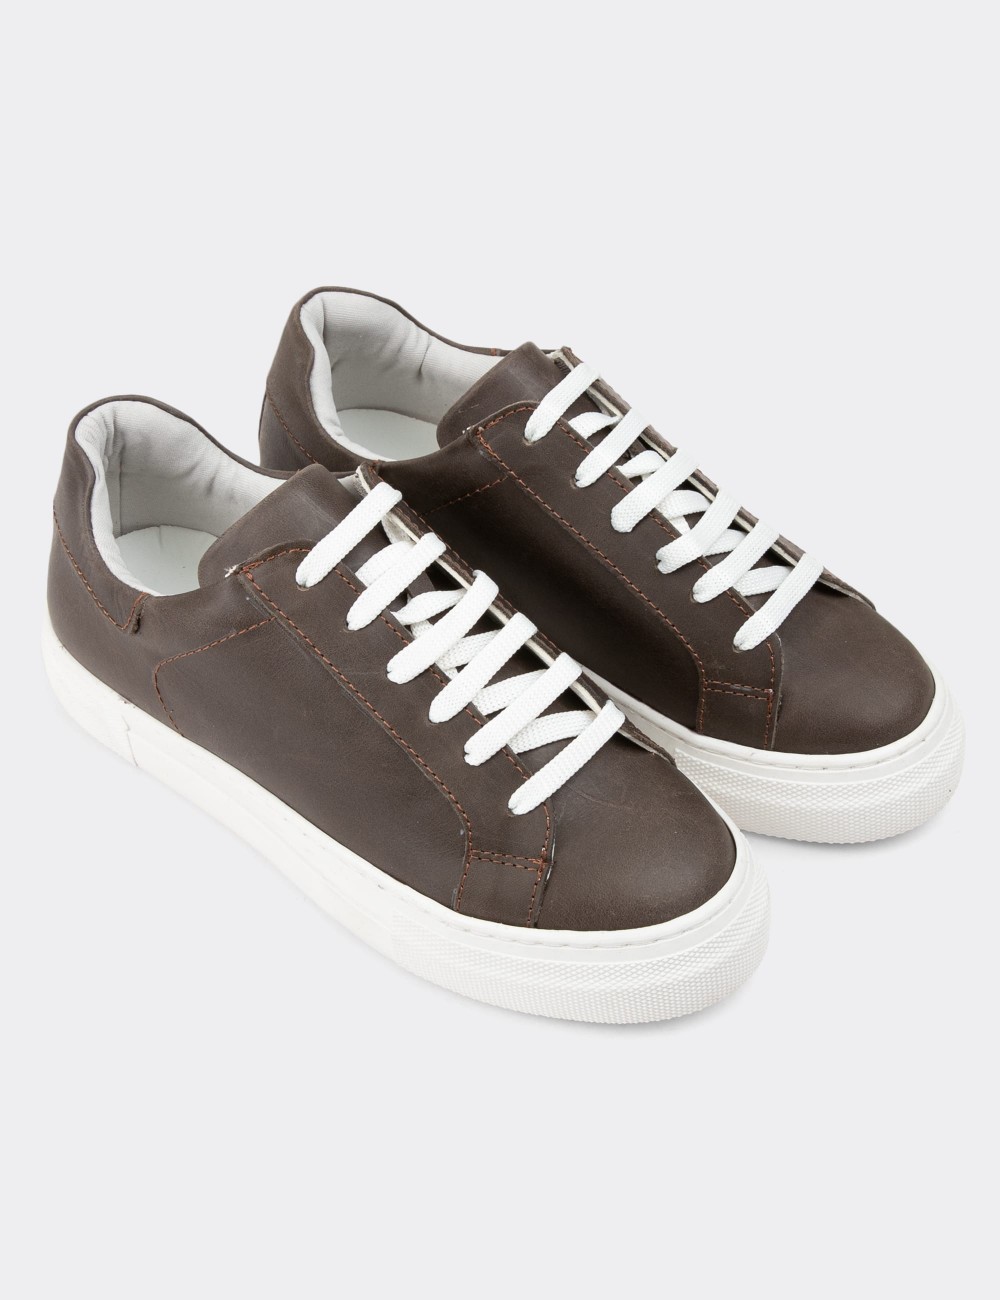 Brown Leather Sneakers - Z1681ZKHVC34